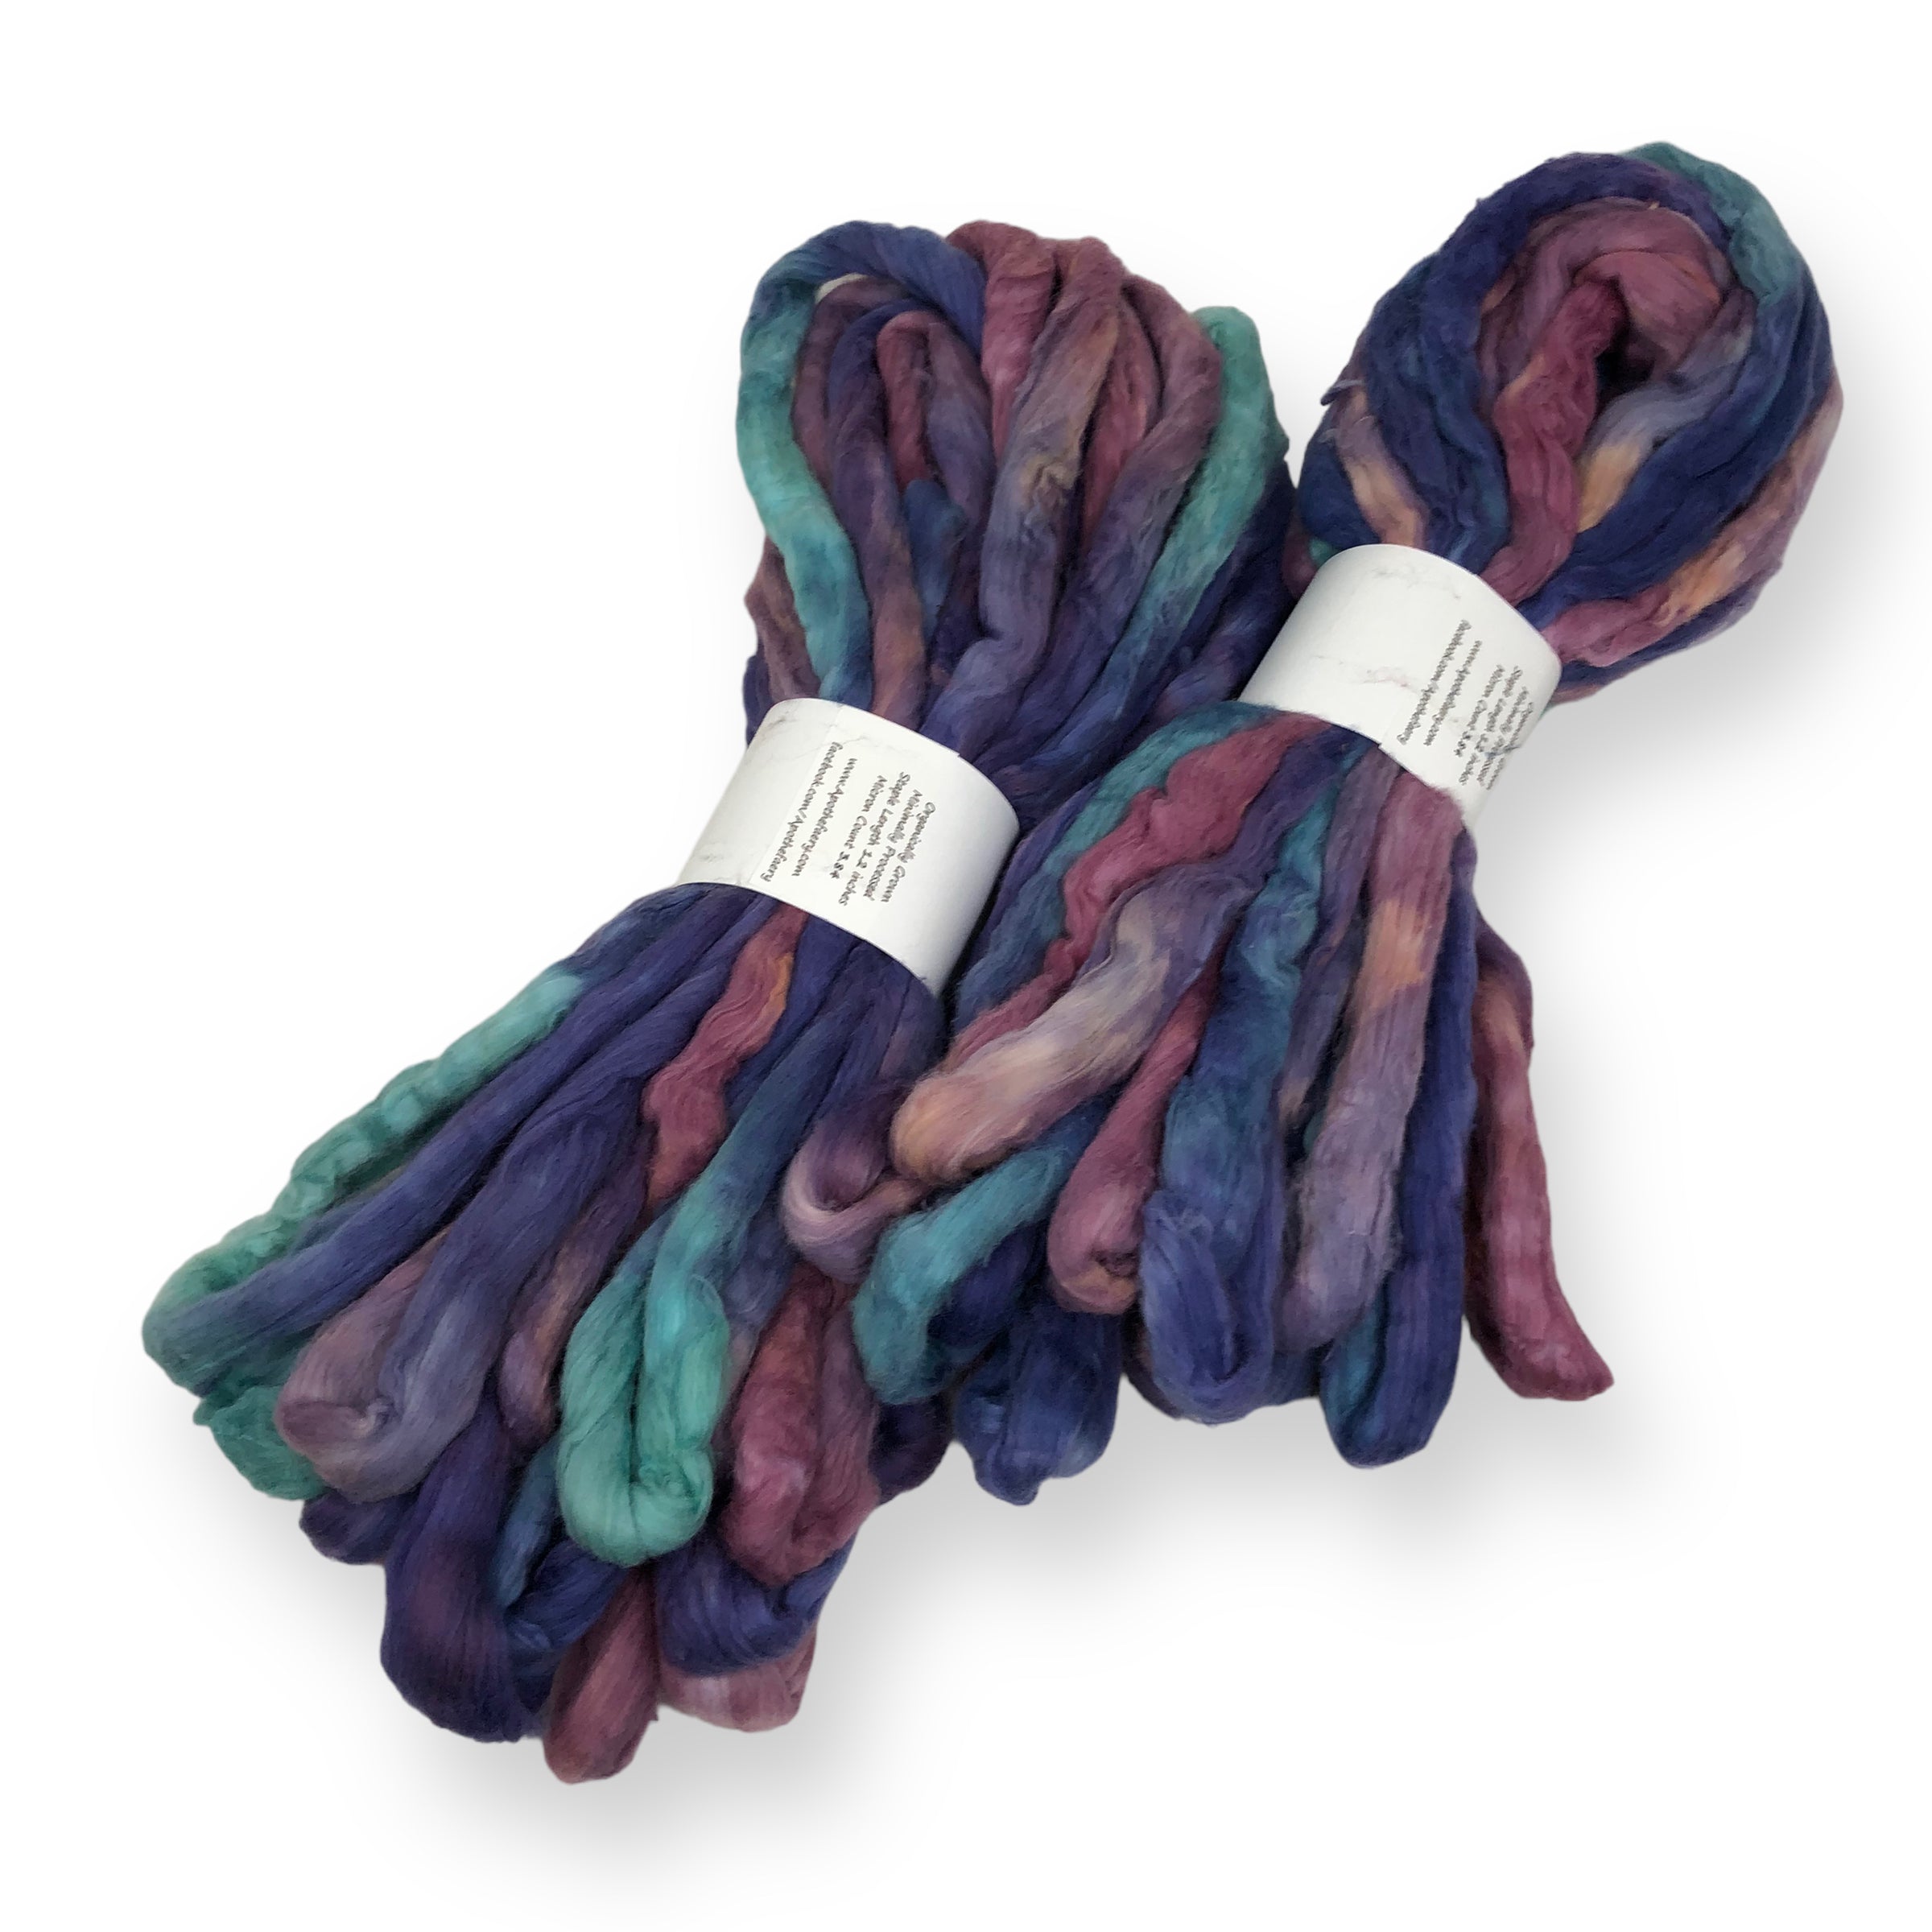 Ice Dyed Acala - "Easy to Spin" USA grown Cotton